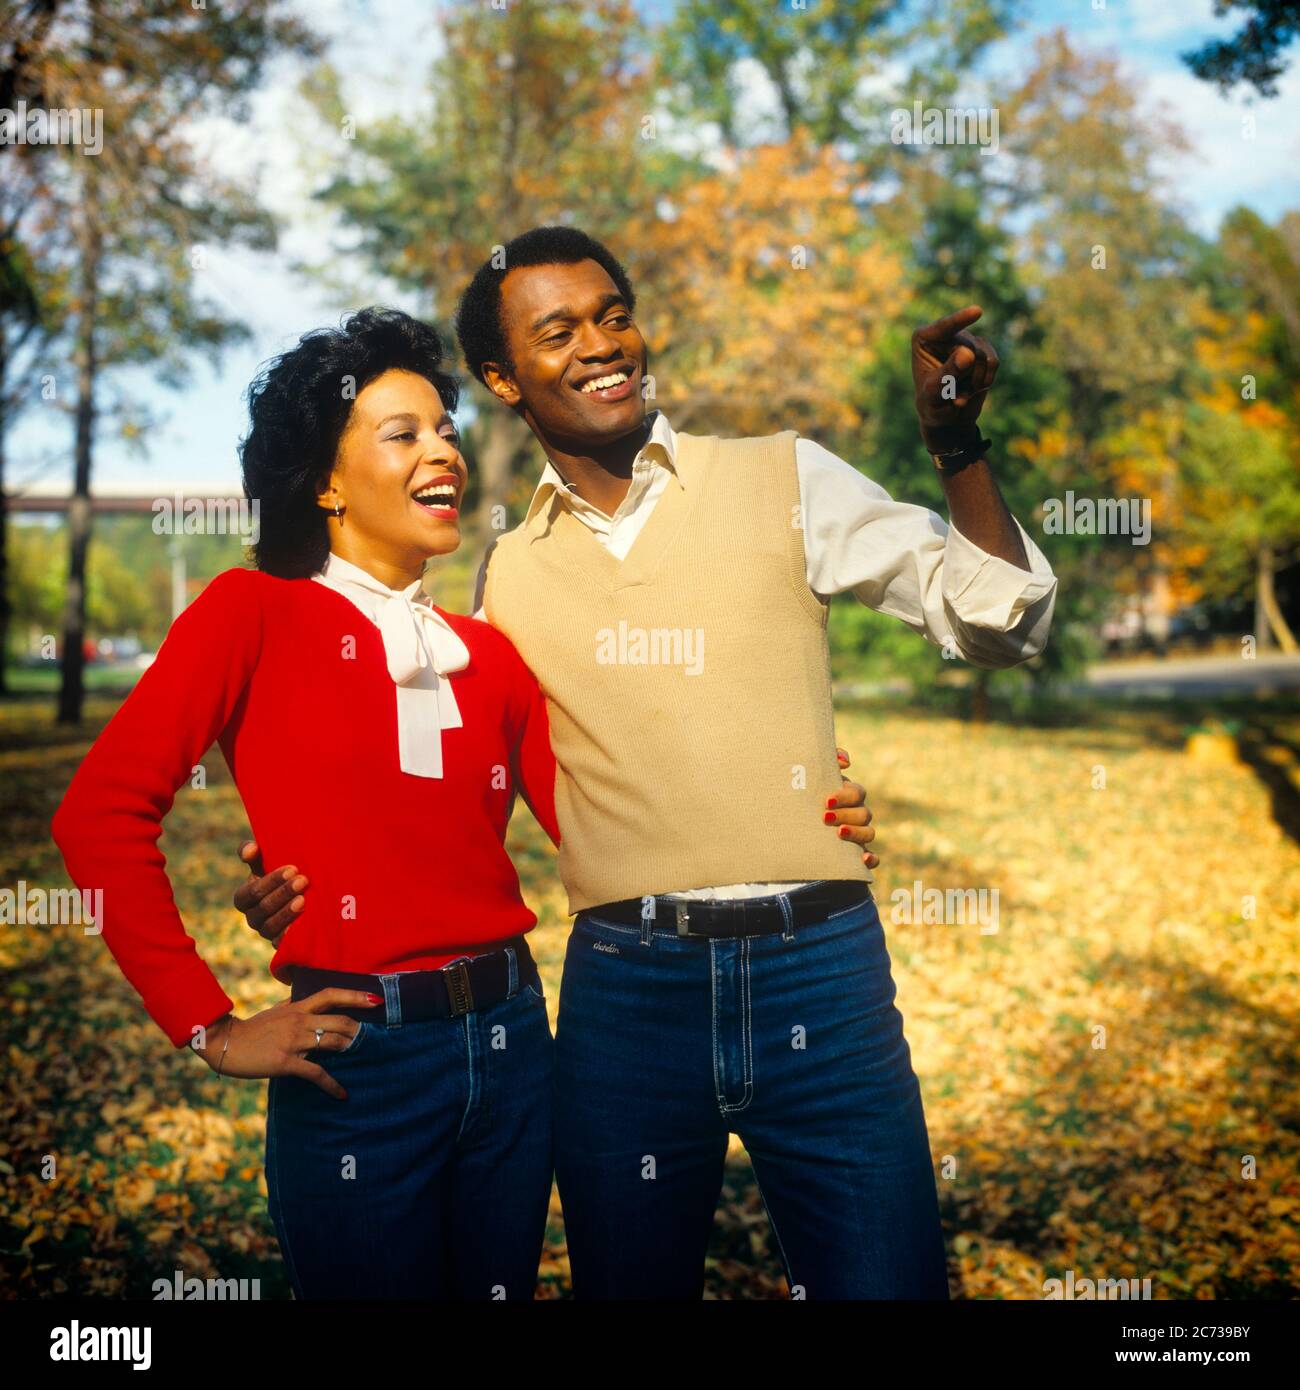 1980s SMILING AFRICAN-AMERICAN COUPLE SMILING ARM IN ARM OUTDOORS IN AUTUMN WEARING KNIT SWEATERS AND DENIM BLUE JEANS  - ks21057 TEU001 HARS EXPRESSION OLD TIME NOSTALGIA OLD FASHION 1 FACIAL STYLE LAUGH PLEASED JOY LIFESTYLE FEMALES MARRIED RURAL SPOUSE HUSBANDS HEALTHINESS COPY SPACE FRIENDSHIP HALF-LENGTH LADIES PERSONS MALES CONFIDENCE DENIM EXPRESSIONS KNIT PARTNER HAPPINESS CHEERFUL STYLES AFRICAN-AMERICANS AFRICAN-AMERICAN AND ARM IN ARM BLACK ETHNICITY FALL SEASON IN SMILES SWEATERS CONNECTION CONCEPTUAL JOYFUL STYLISH BLUE JEANS FASHIONS MID-ADULT MID-ADULT MAN MID-ADULT WOMAN Stock Photo